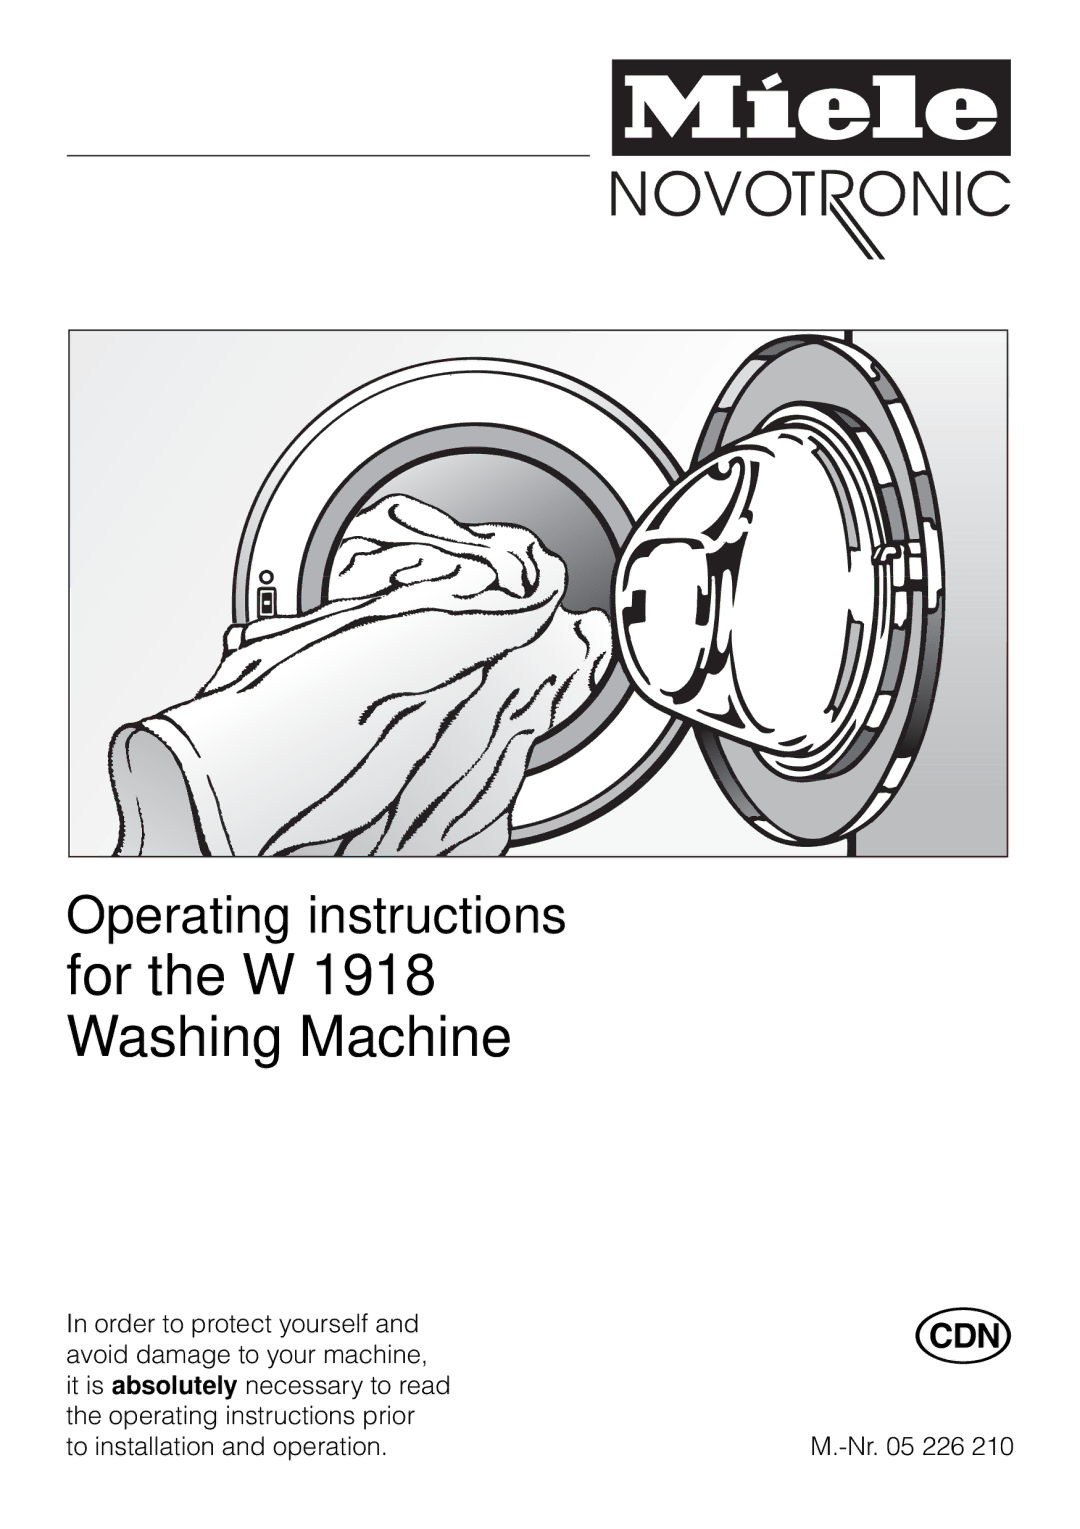 Miele operating instructions For the W 1918 Washing Machine 